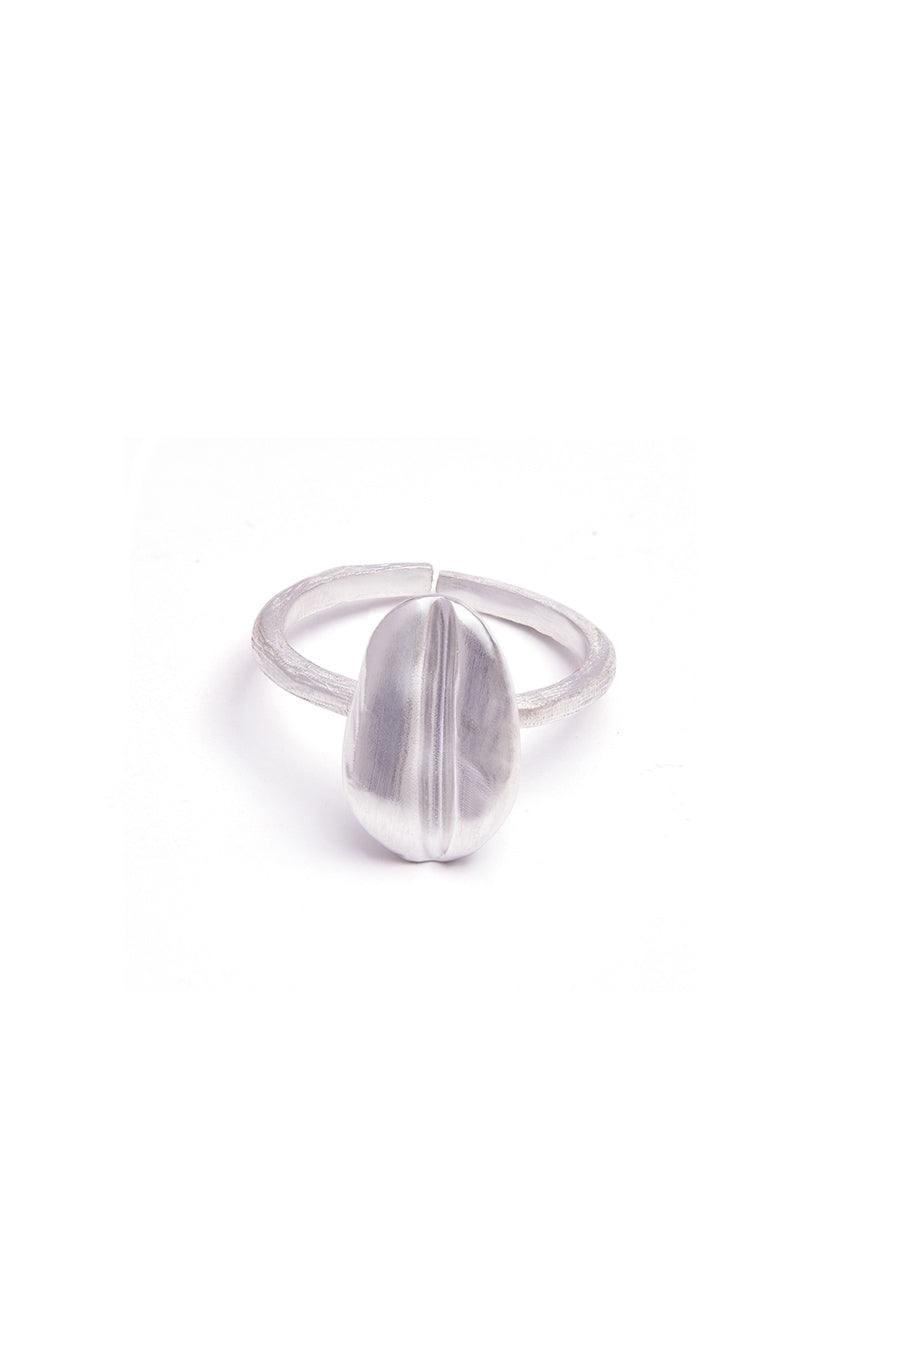 Silver Polished Bean Ring